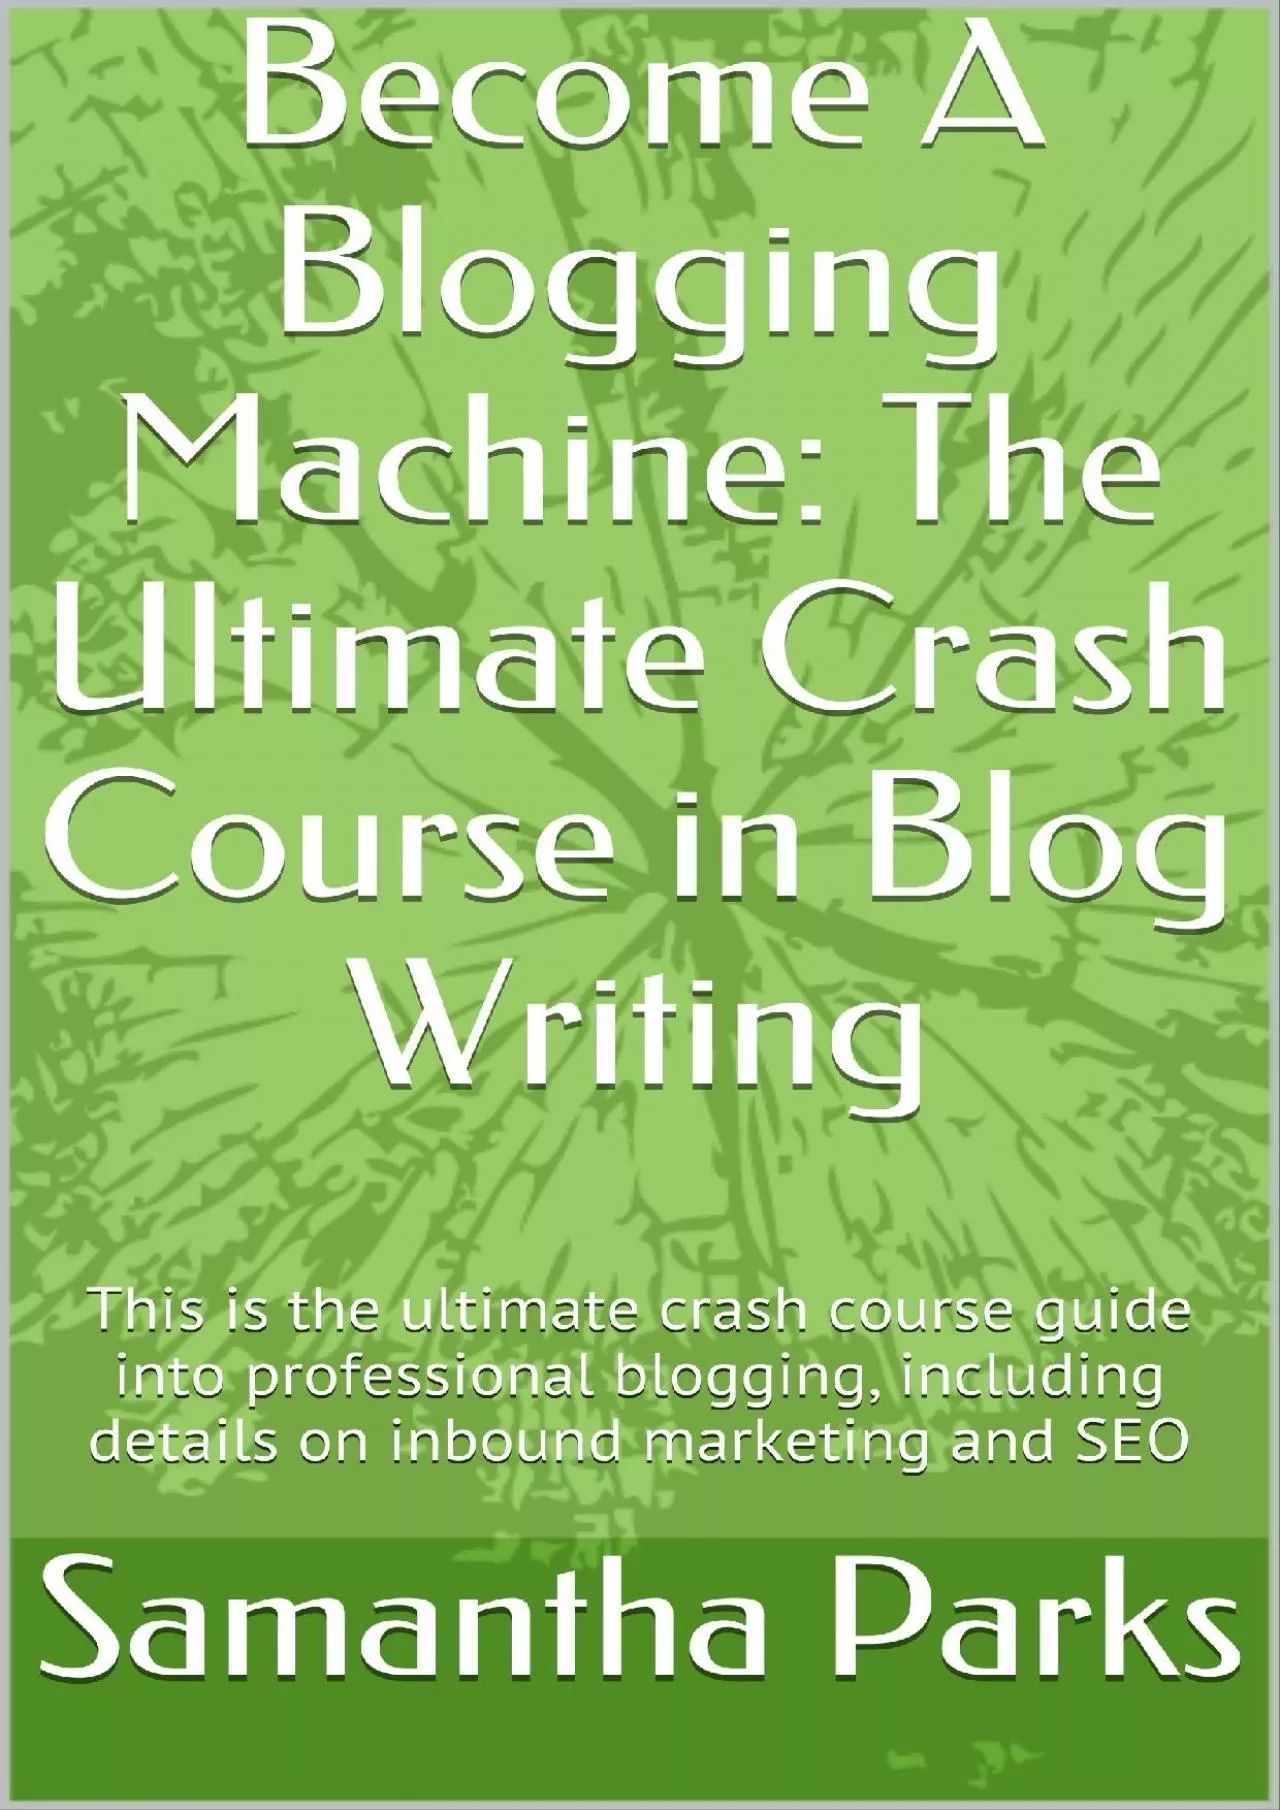 (EBOOK)-Become A Blogging Machine The Ultimate Crash Course in Blog Writing This is the